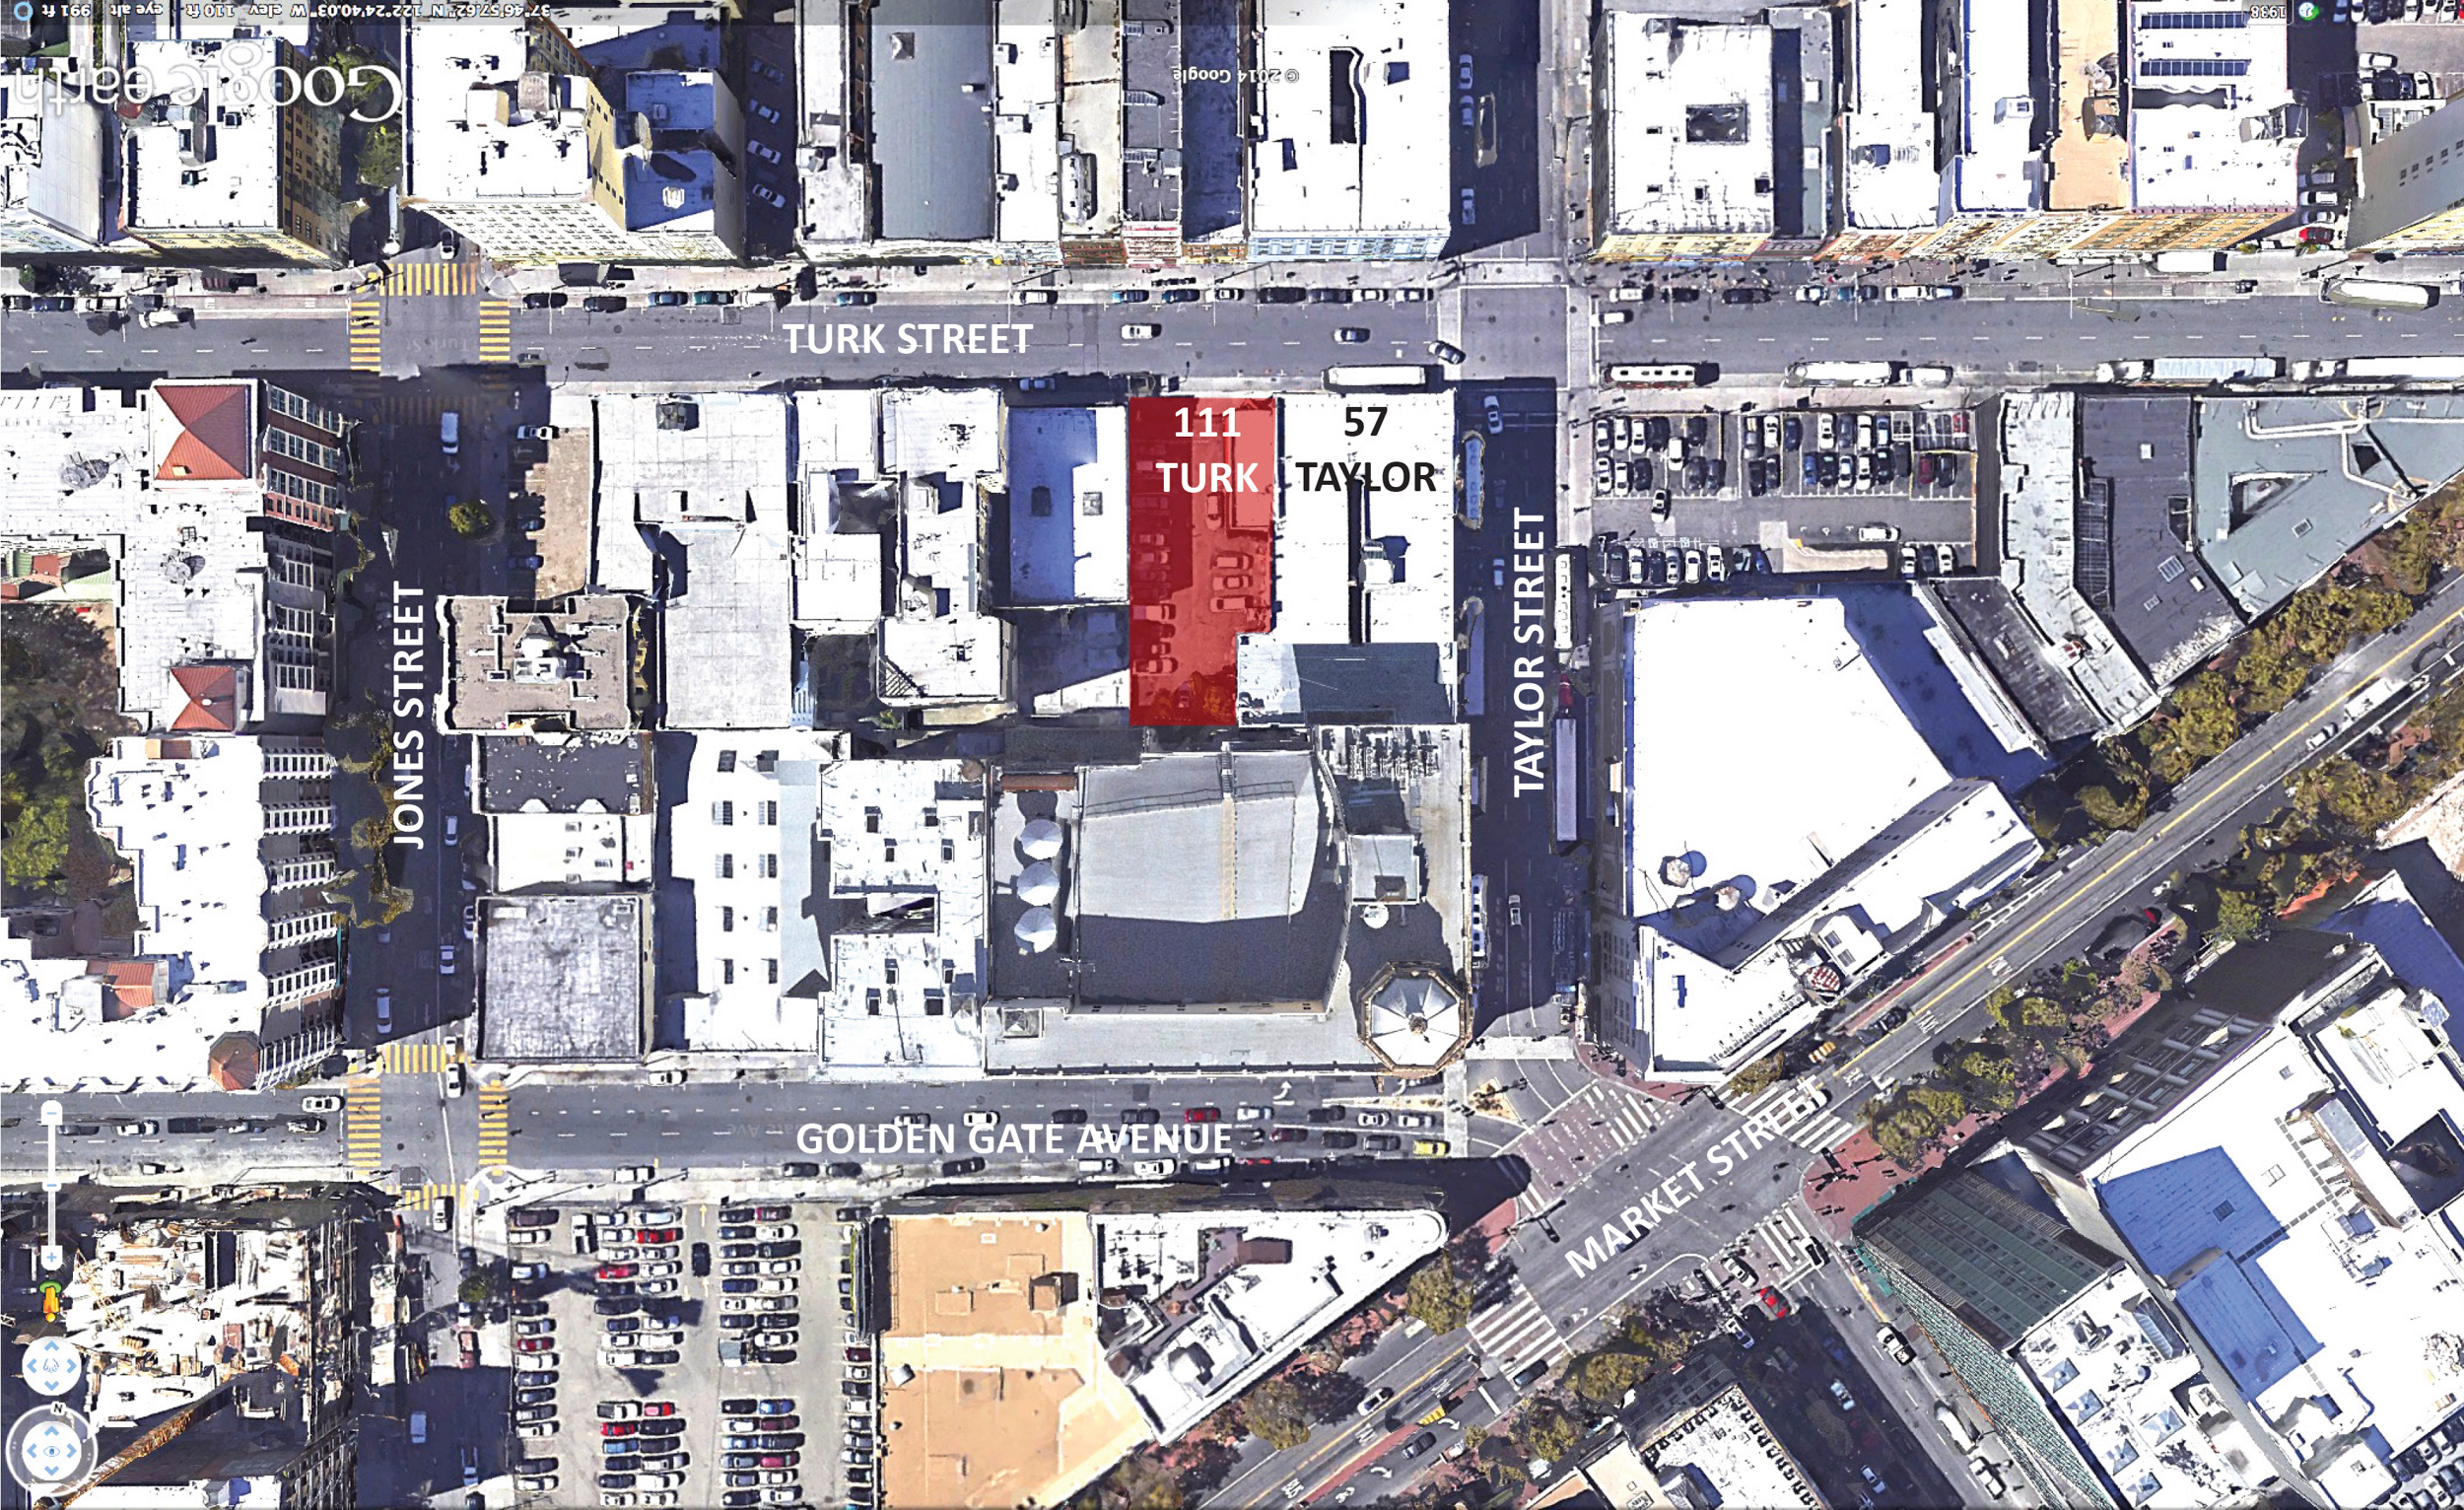 111 Turk Street site map, illustration by SmithGroup using Google Earth